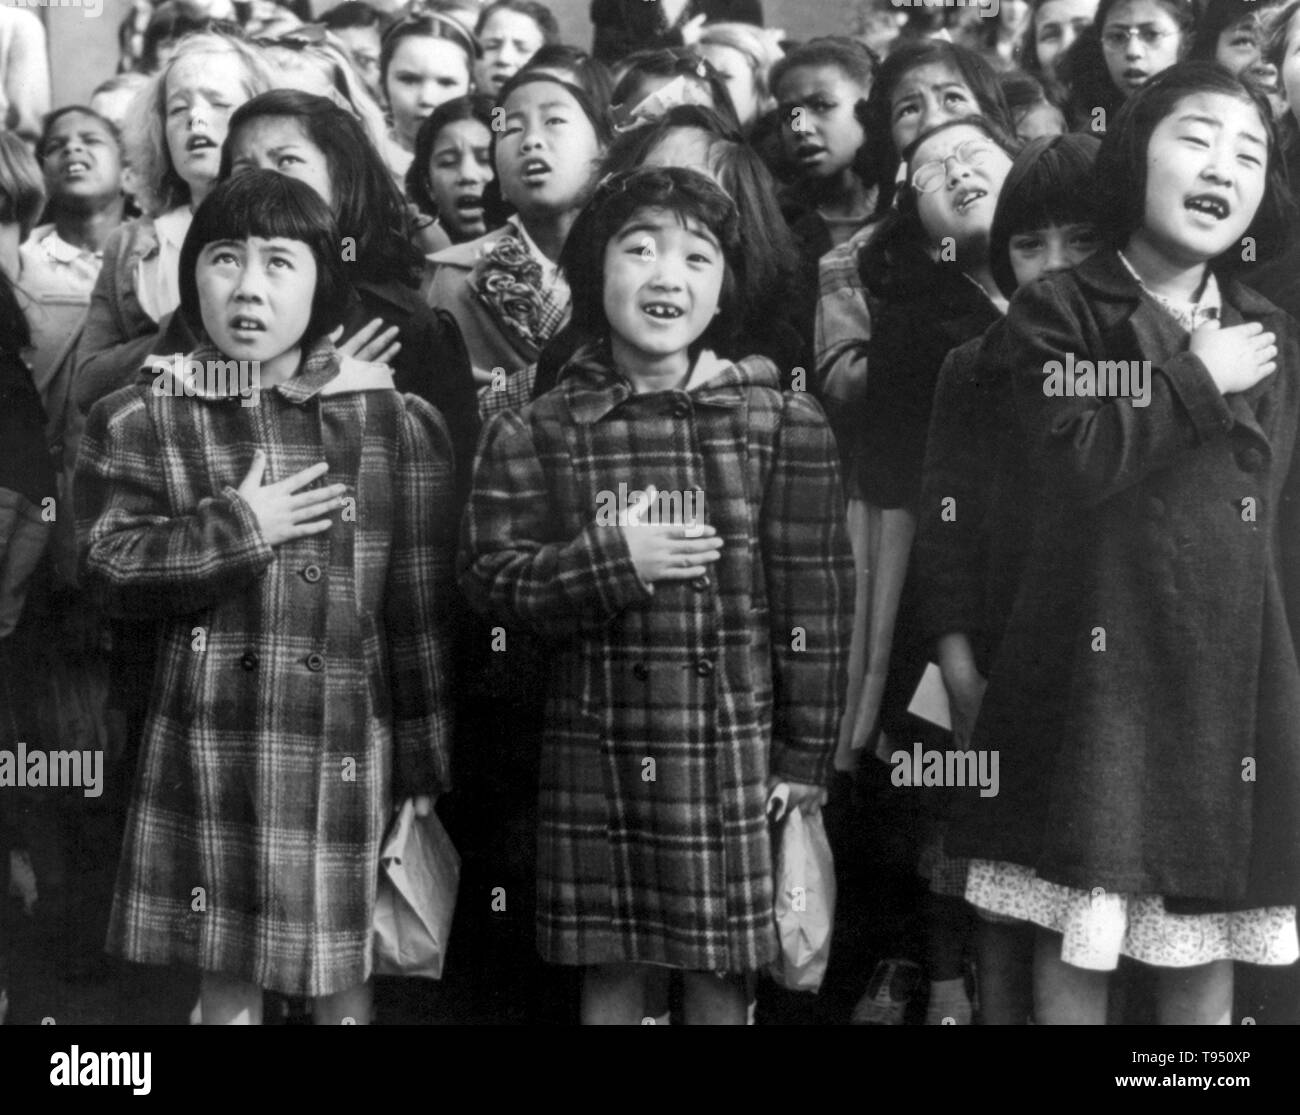 Entitled: 'First graders, some of Japanese ancestry, at the Weill public school pledging allegiance to the United States flag. The evacuees of Japanese ancestry will be housed in War relocation authority centers for the duration of the war.' The Pledge of Allegiance is a solemn vow of loyalty and support for the country. 'I pledge allegiance to the flag of the United States of America, and to the republic for which it stands, one nation under God, indivisible, with liberty and justice for all. Stock Photo